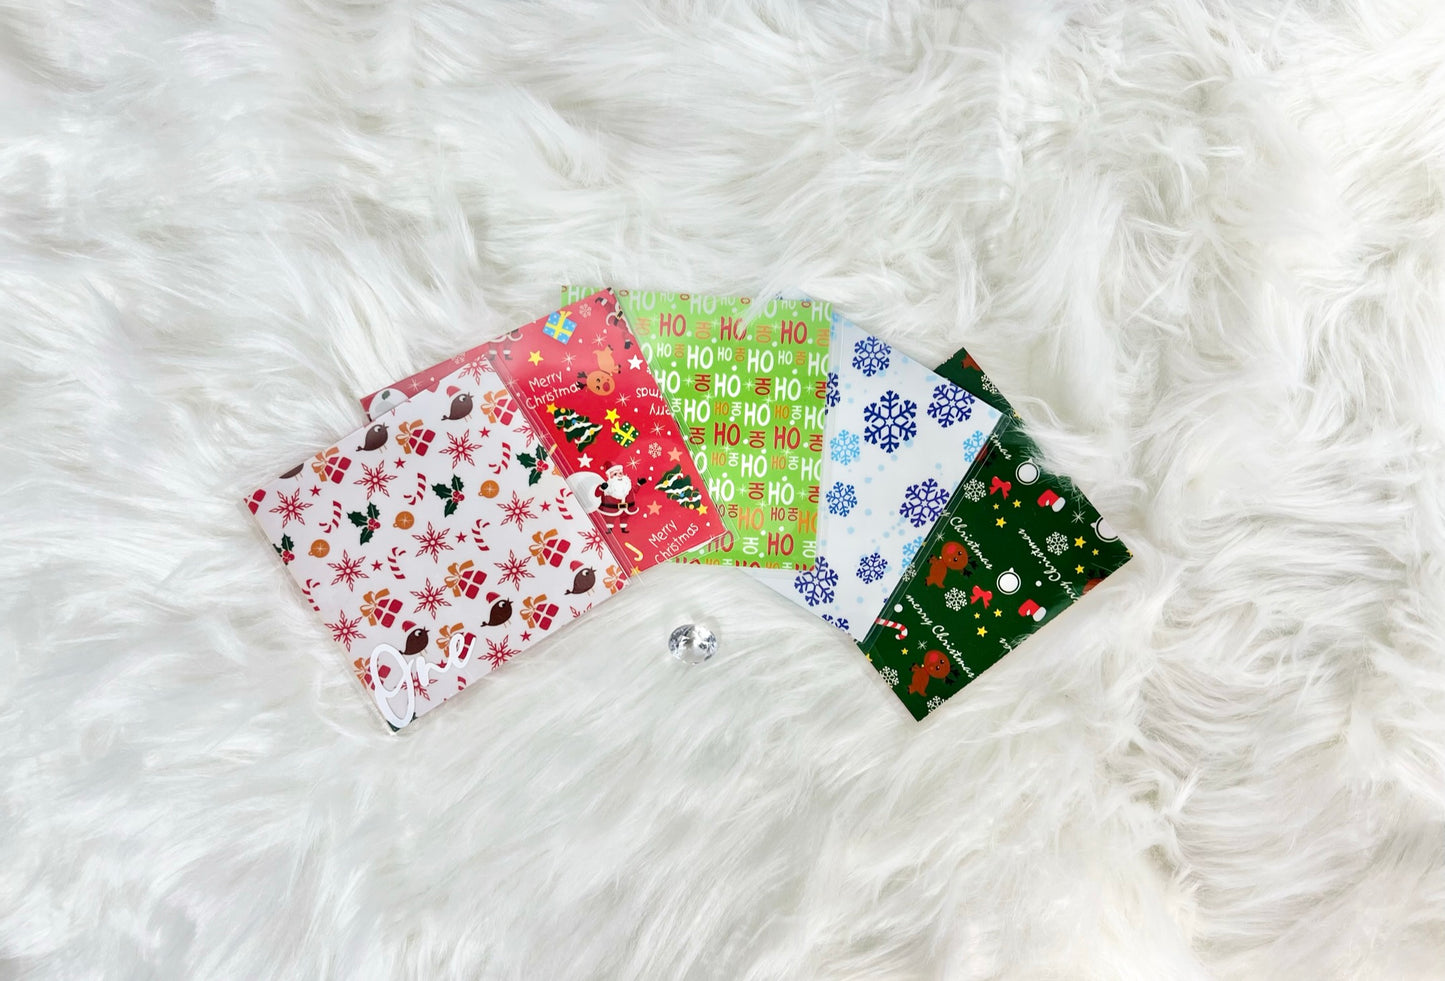 12 Piece Christmas Handcrafted Envelopes - A6